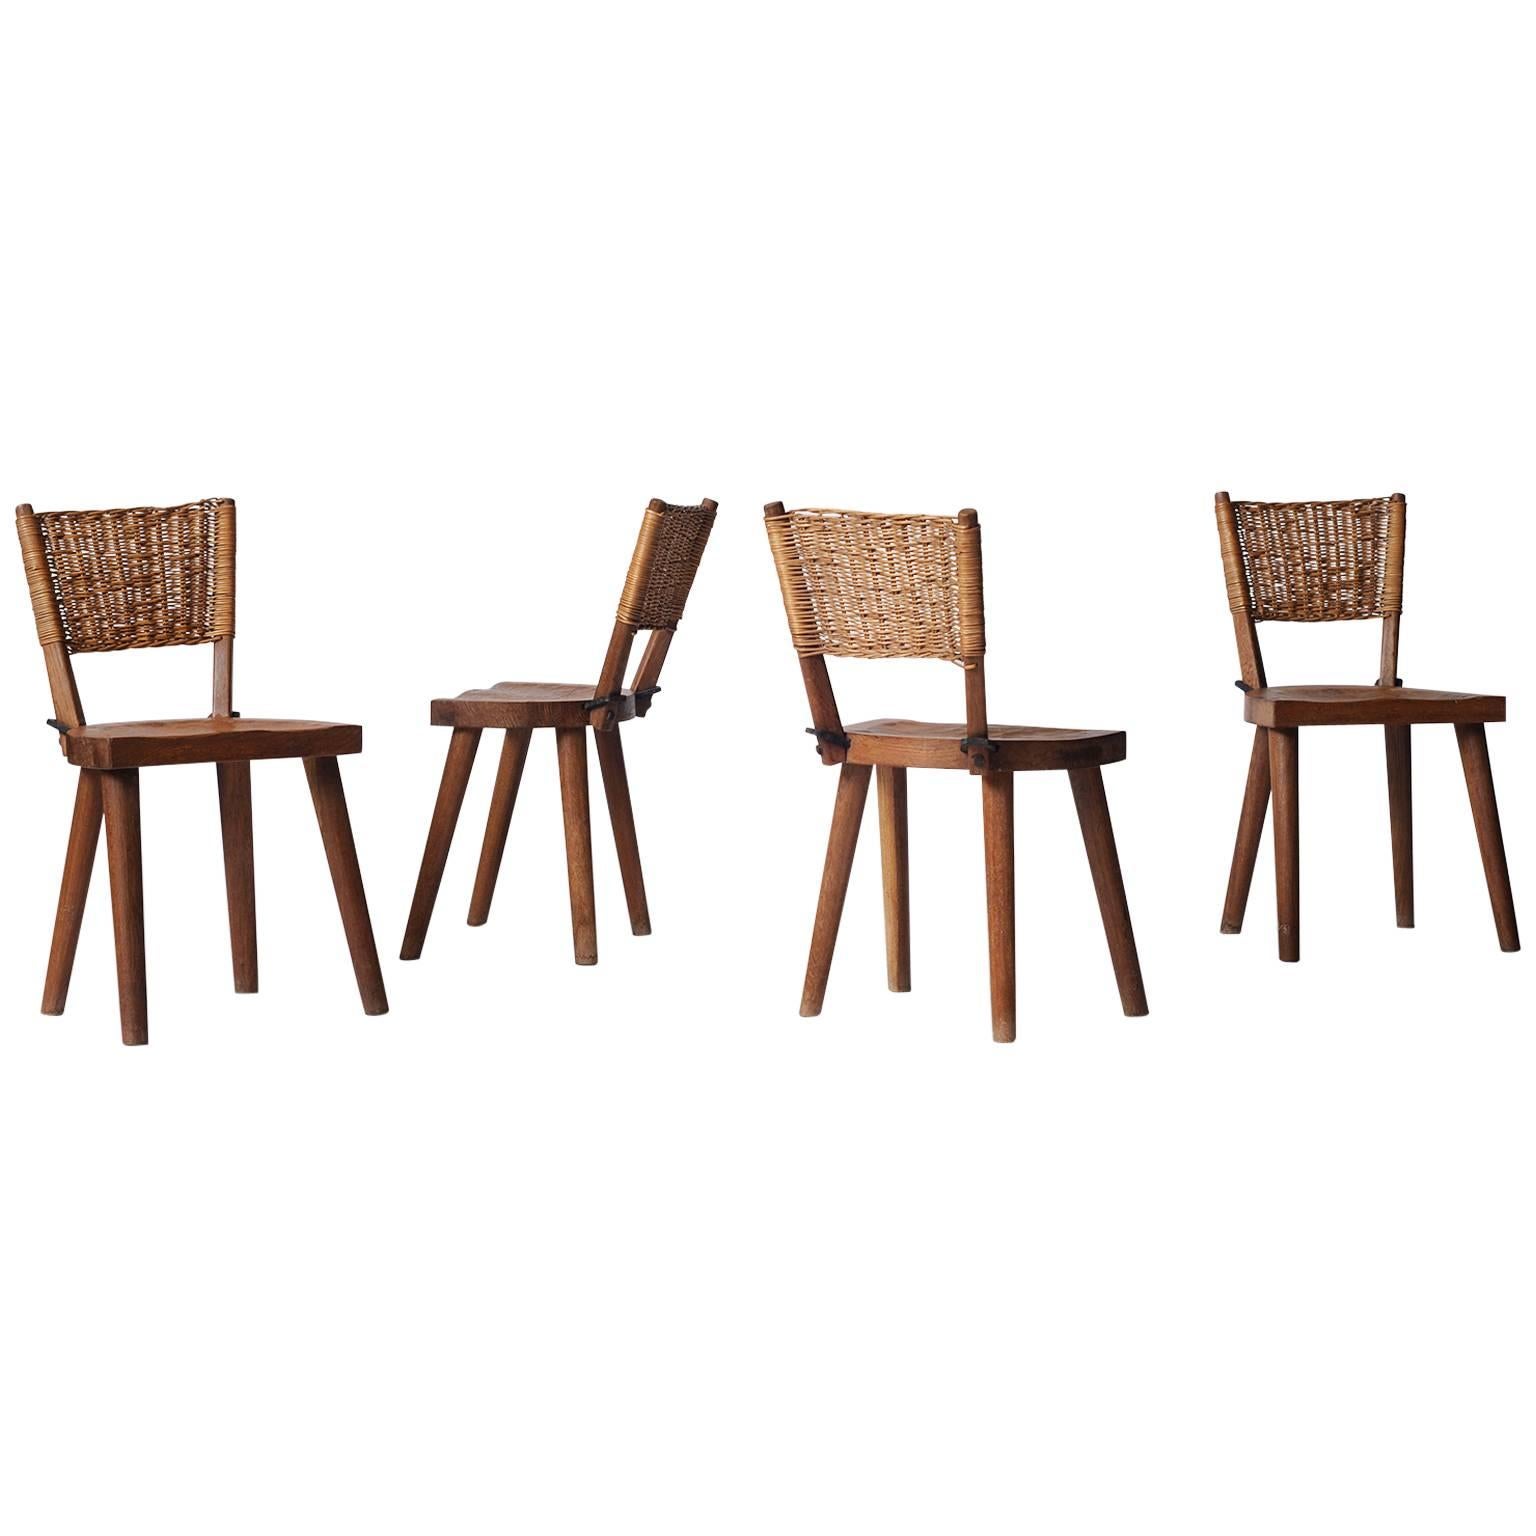 Jean Touret Dining Chairs for Atelier Marolles, France